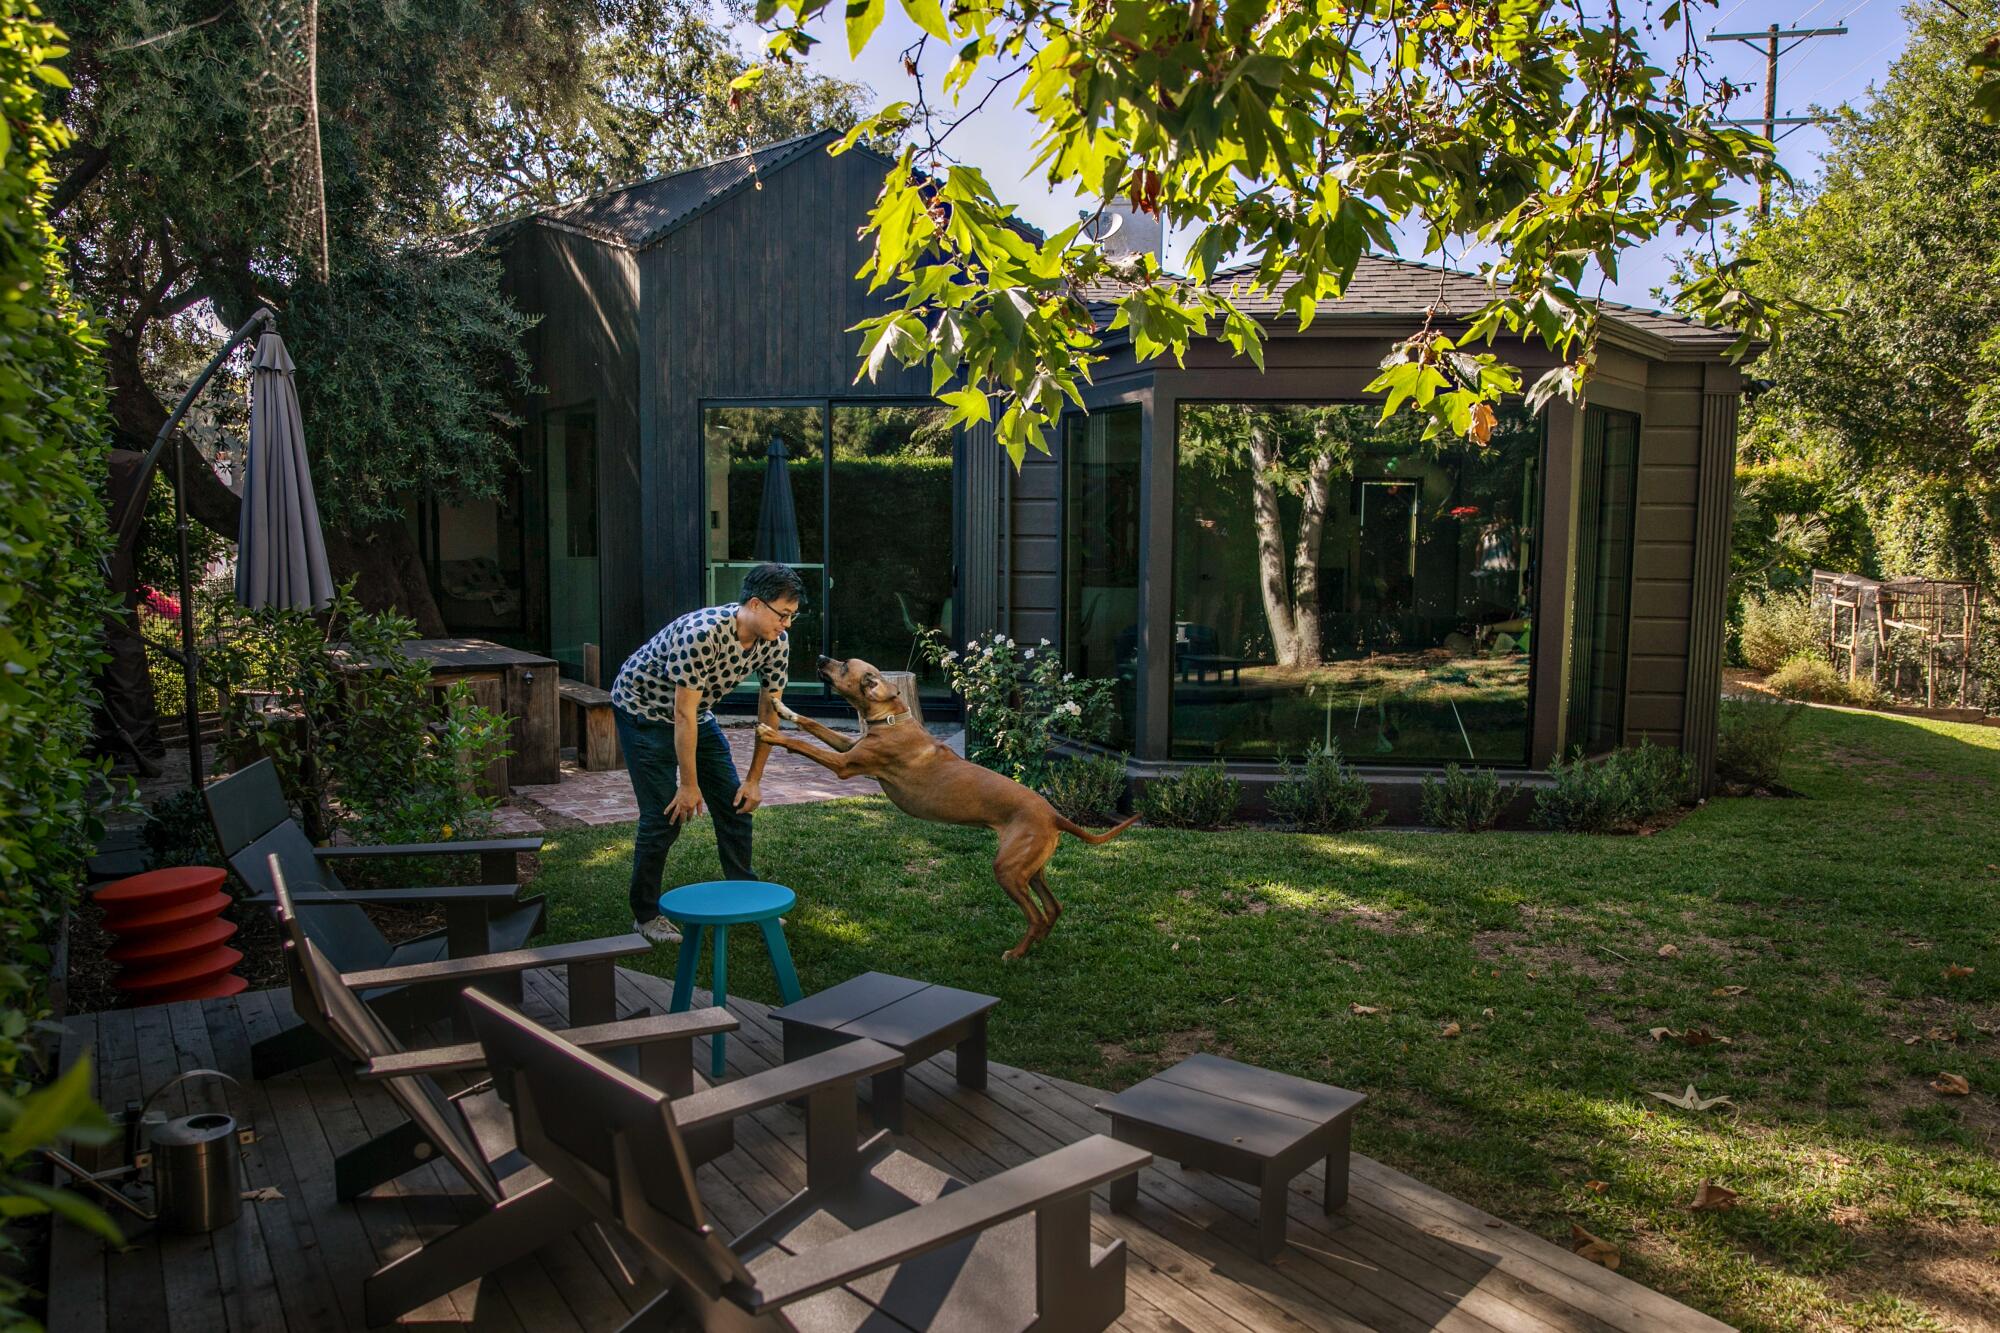 A man plays with a dog in a back yard.